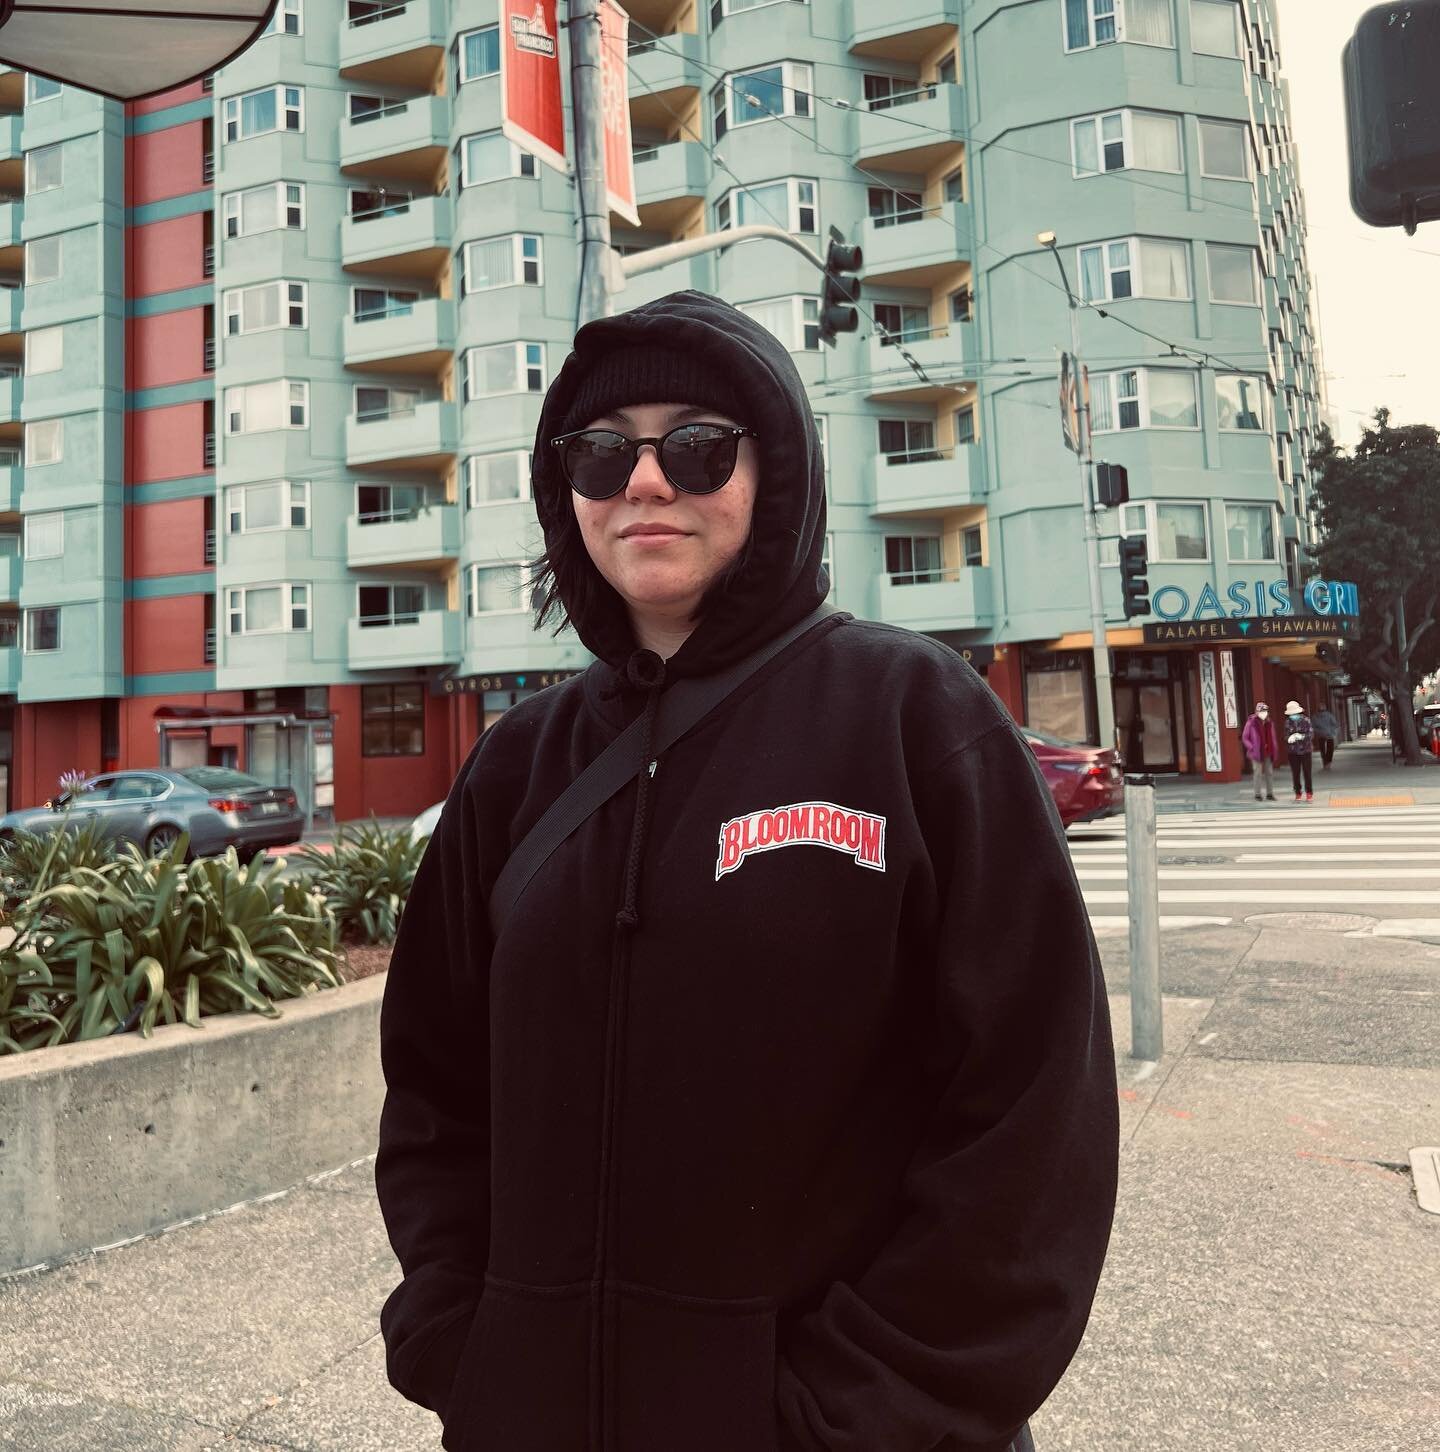 It's always sweater weather in the city! Warm yourself up as you roll up and take a stroll with one of our hoodies! Ask us if we have your size! 🌬🌤 
#bayarea #fashion #sanfrancisco #notforsale #sweater #bloomroomdispensaries